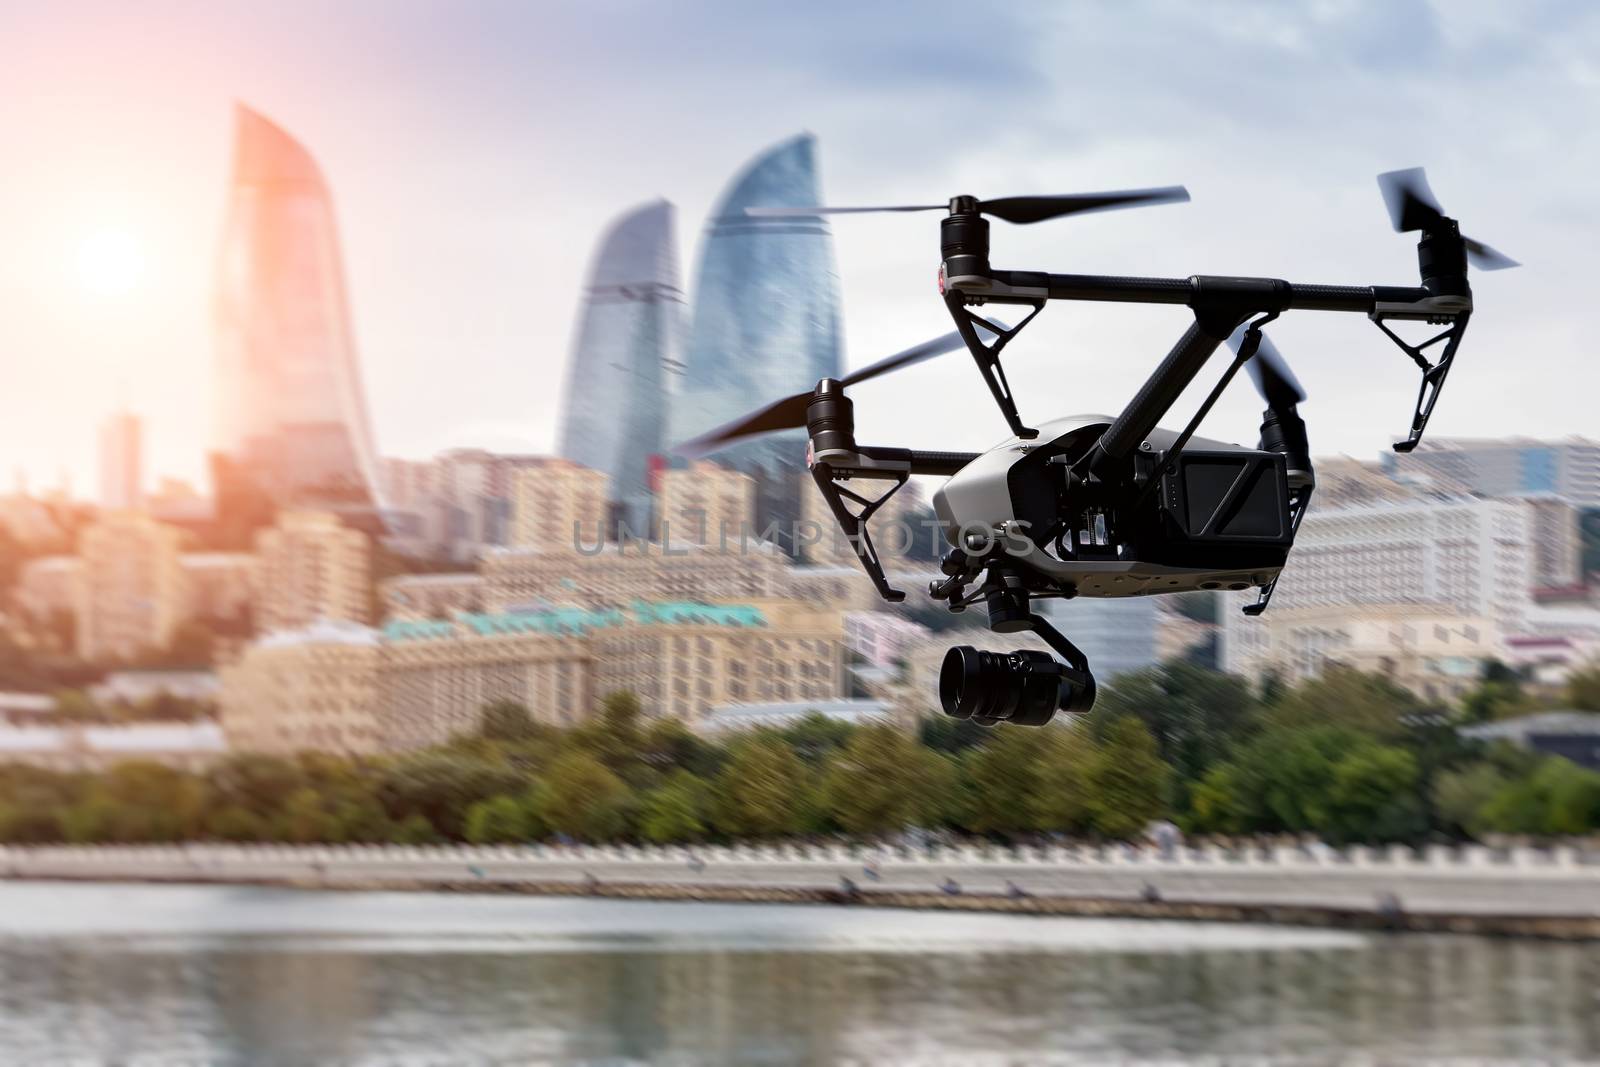 Drone flying over Baku city on blurred background. by ververidis